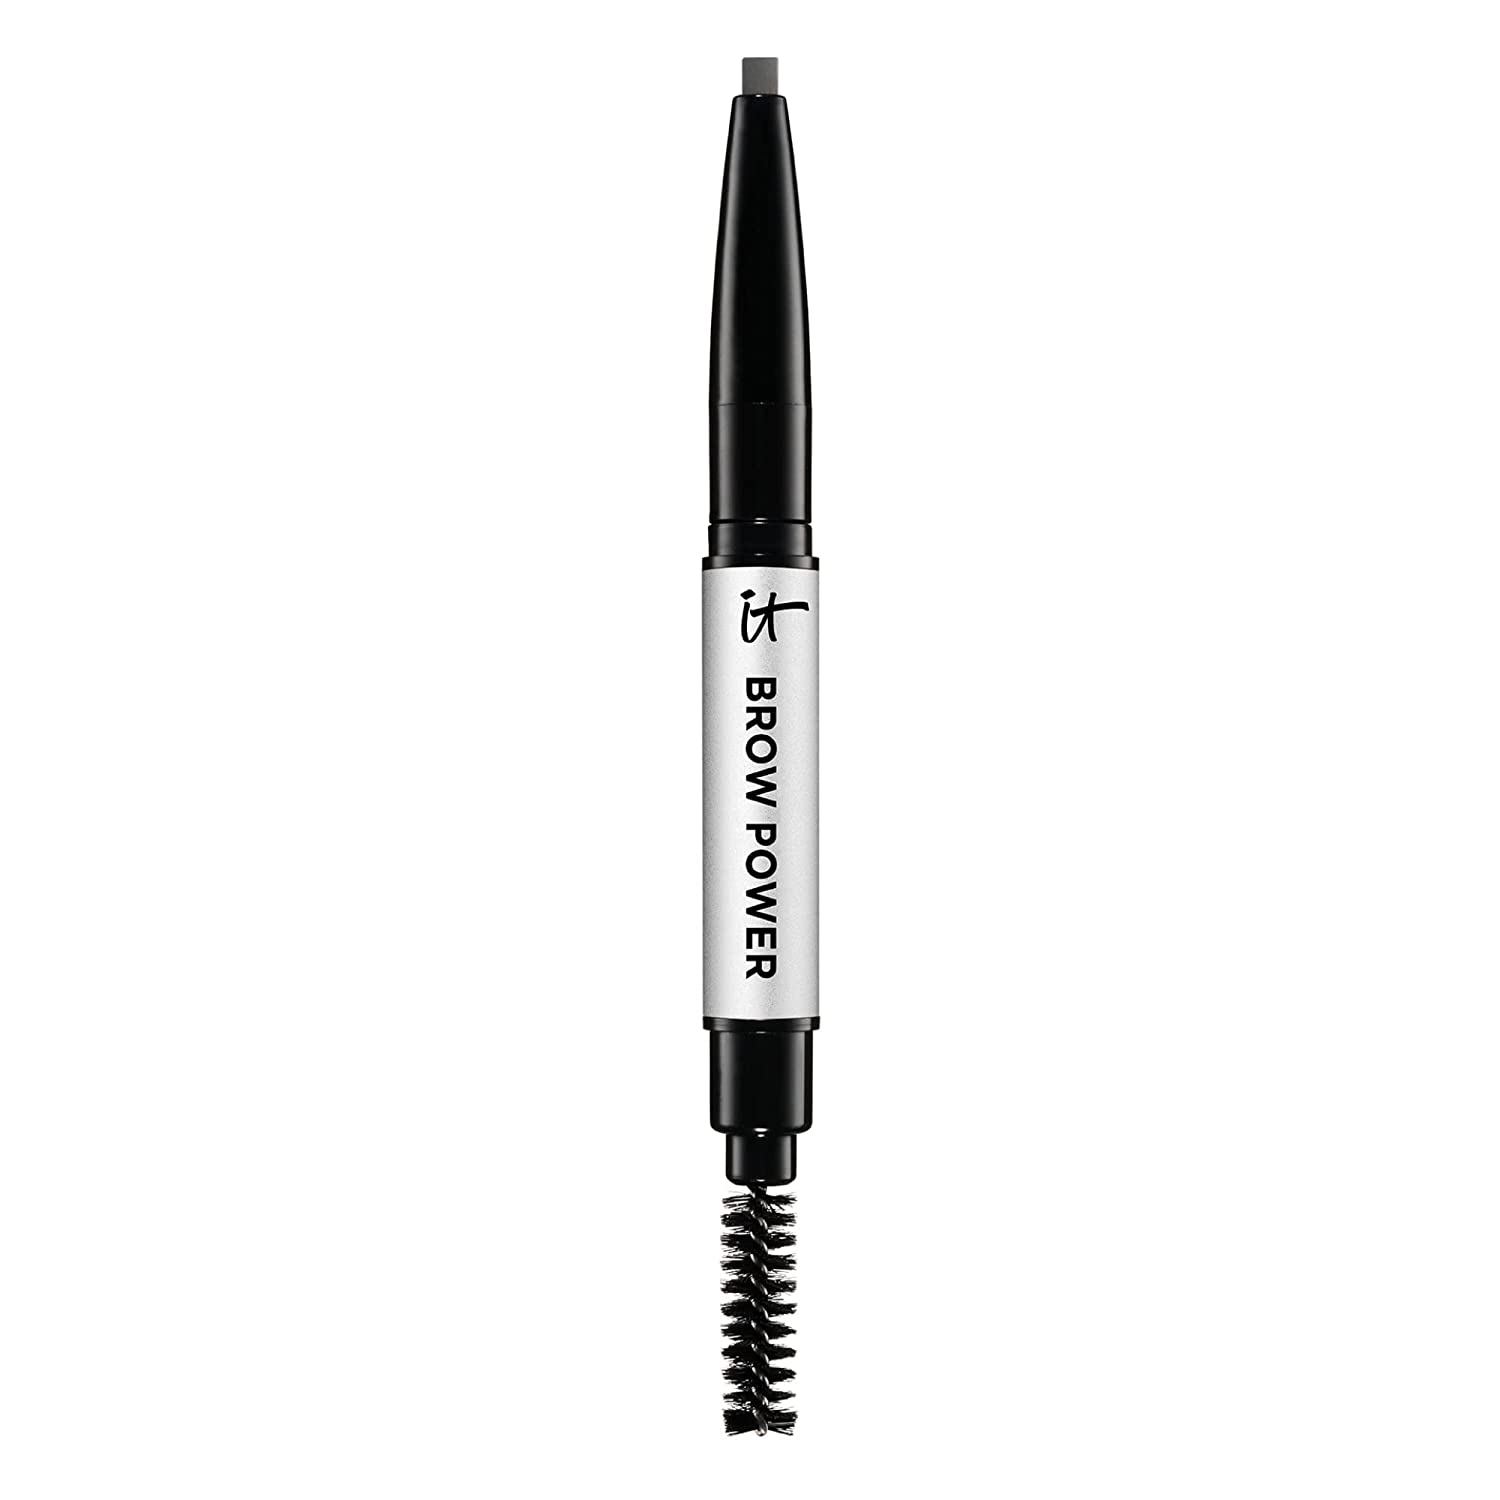 ''IT COSMETICS Brow Power, Universal Taupe - Travel Size - Universal Eyebrow Pencil - Mimics the Look